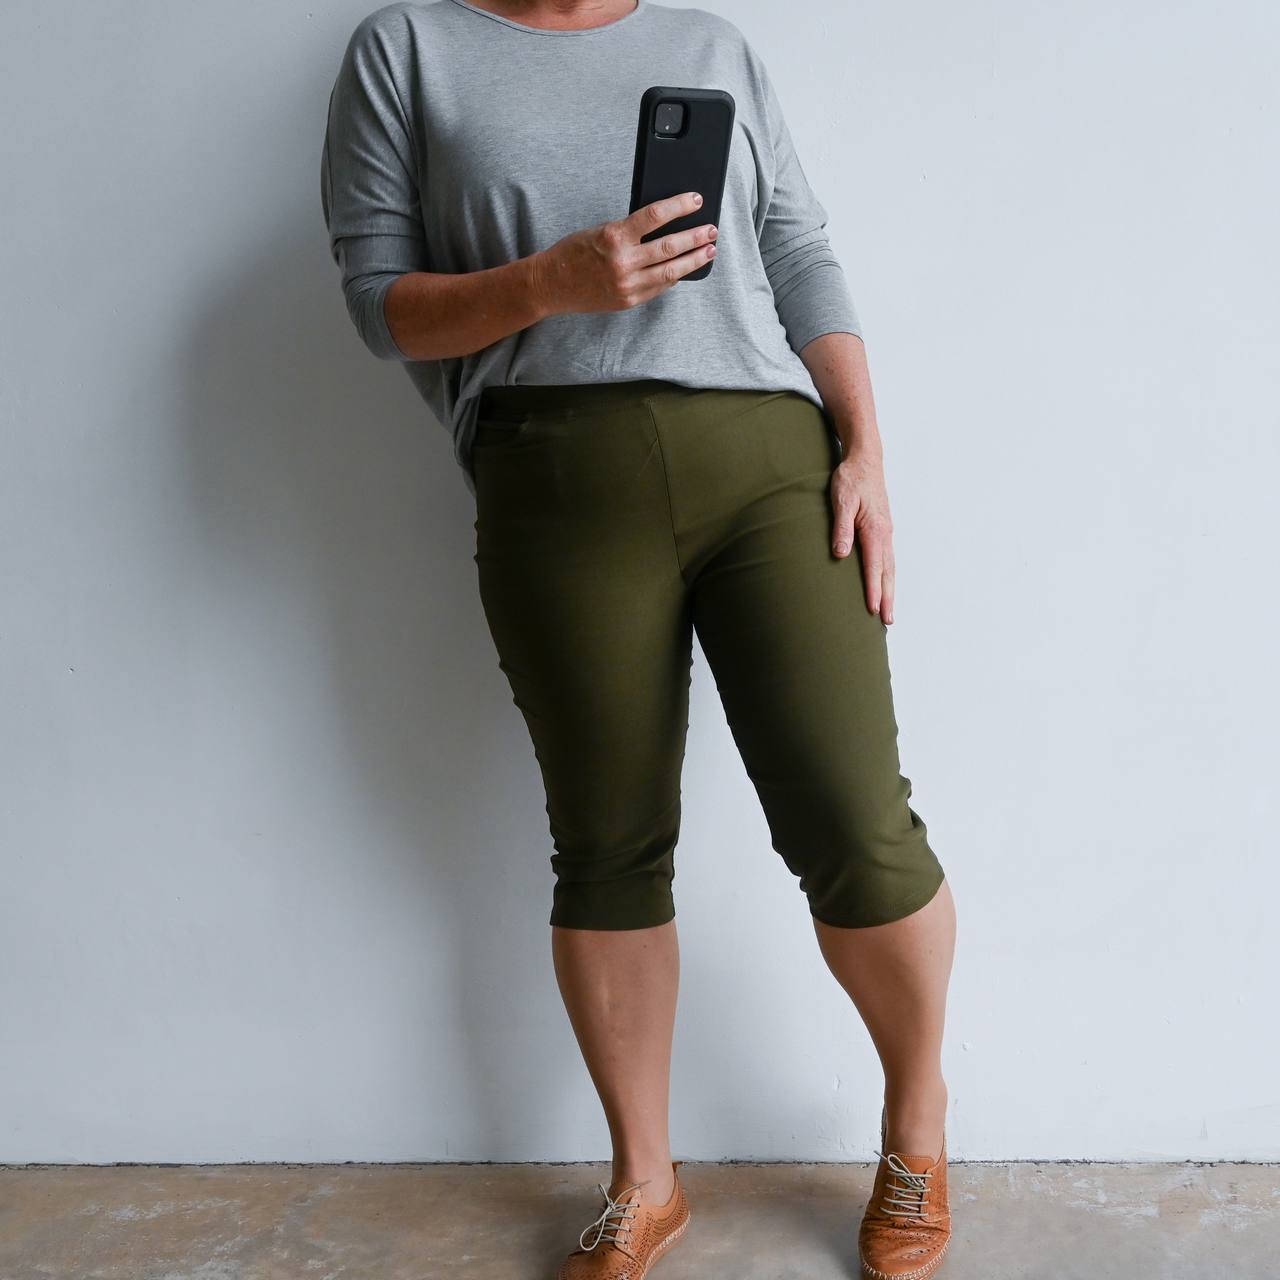 How to wear capris or cropped pants - your complete guide